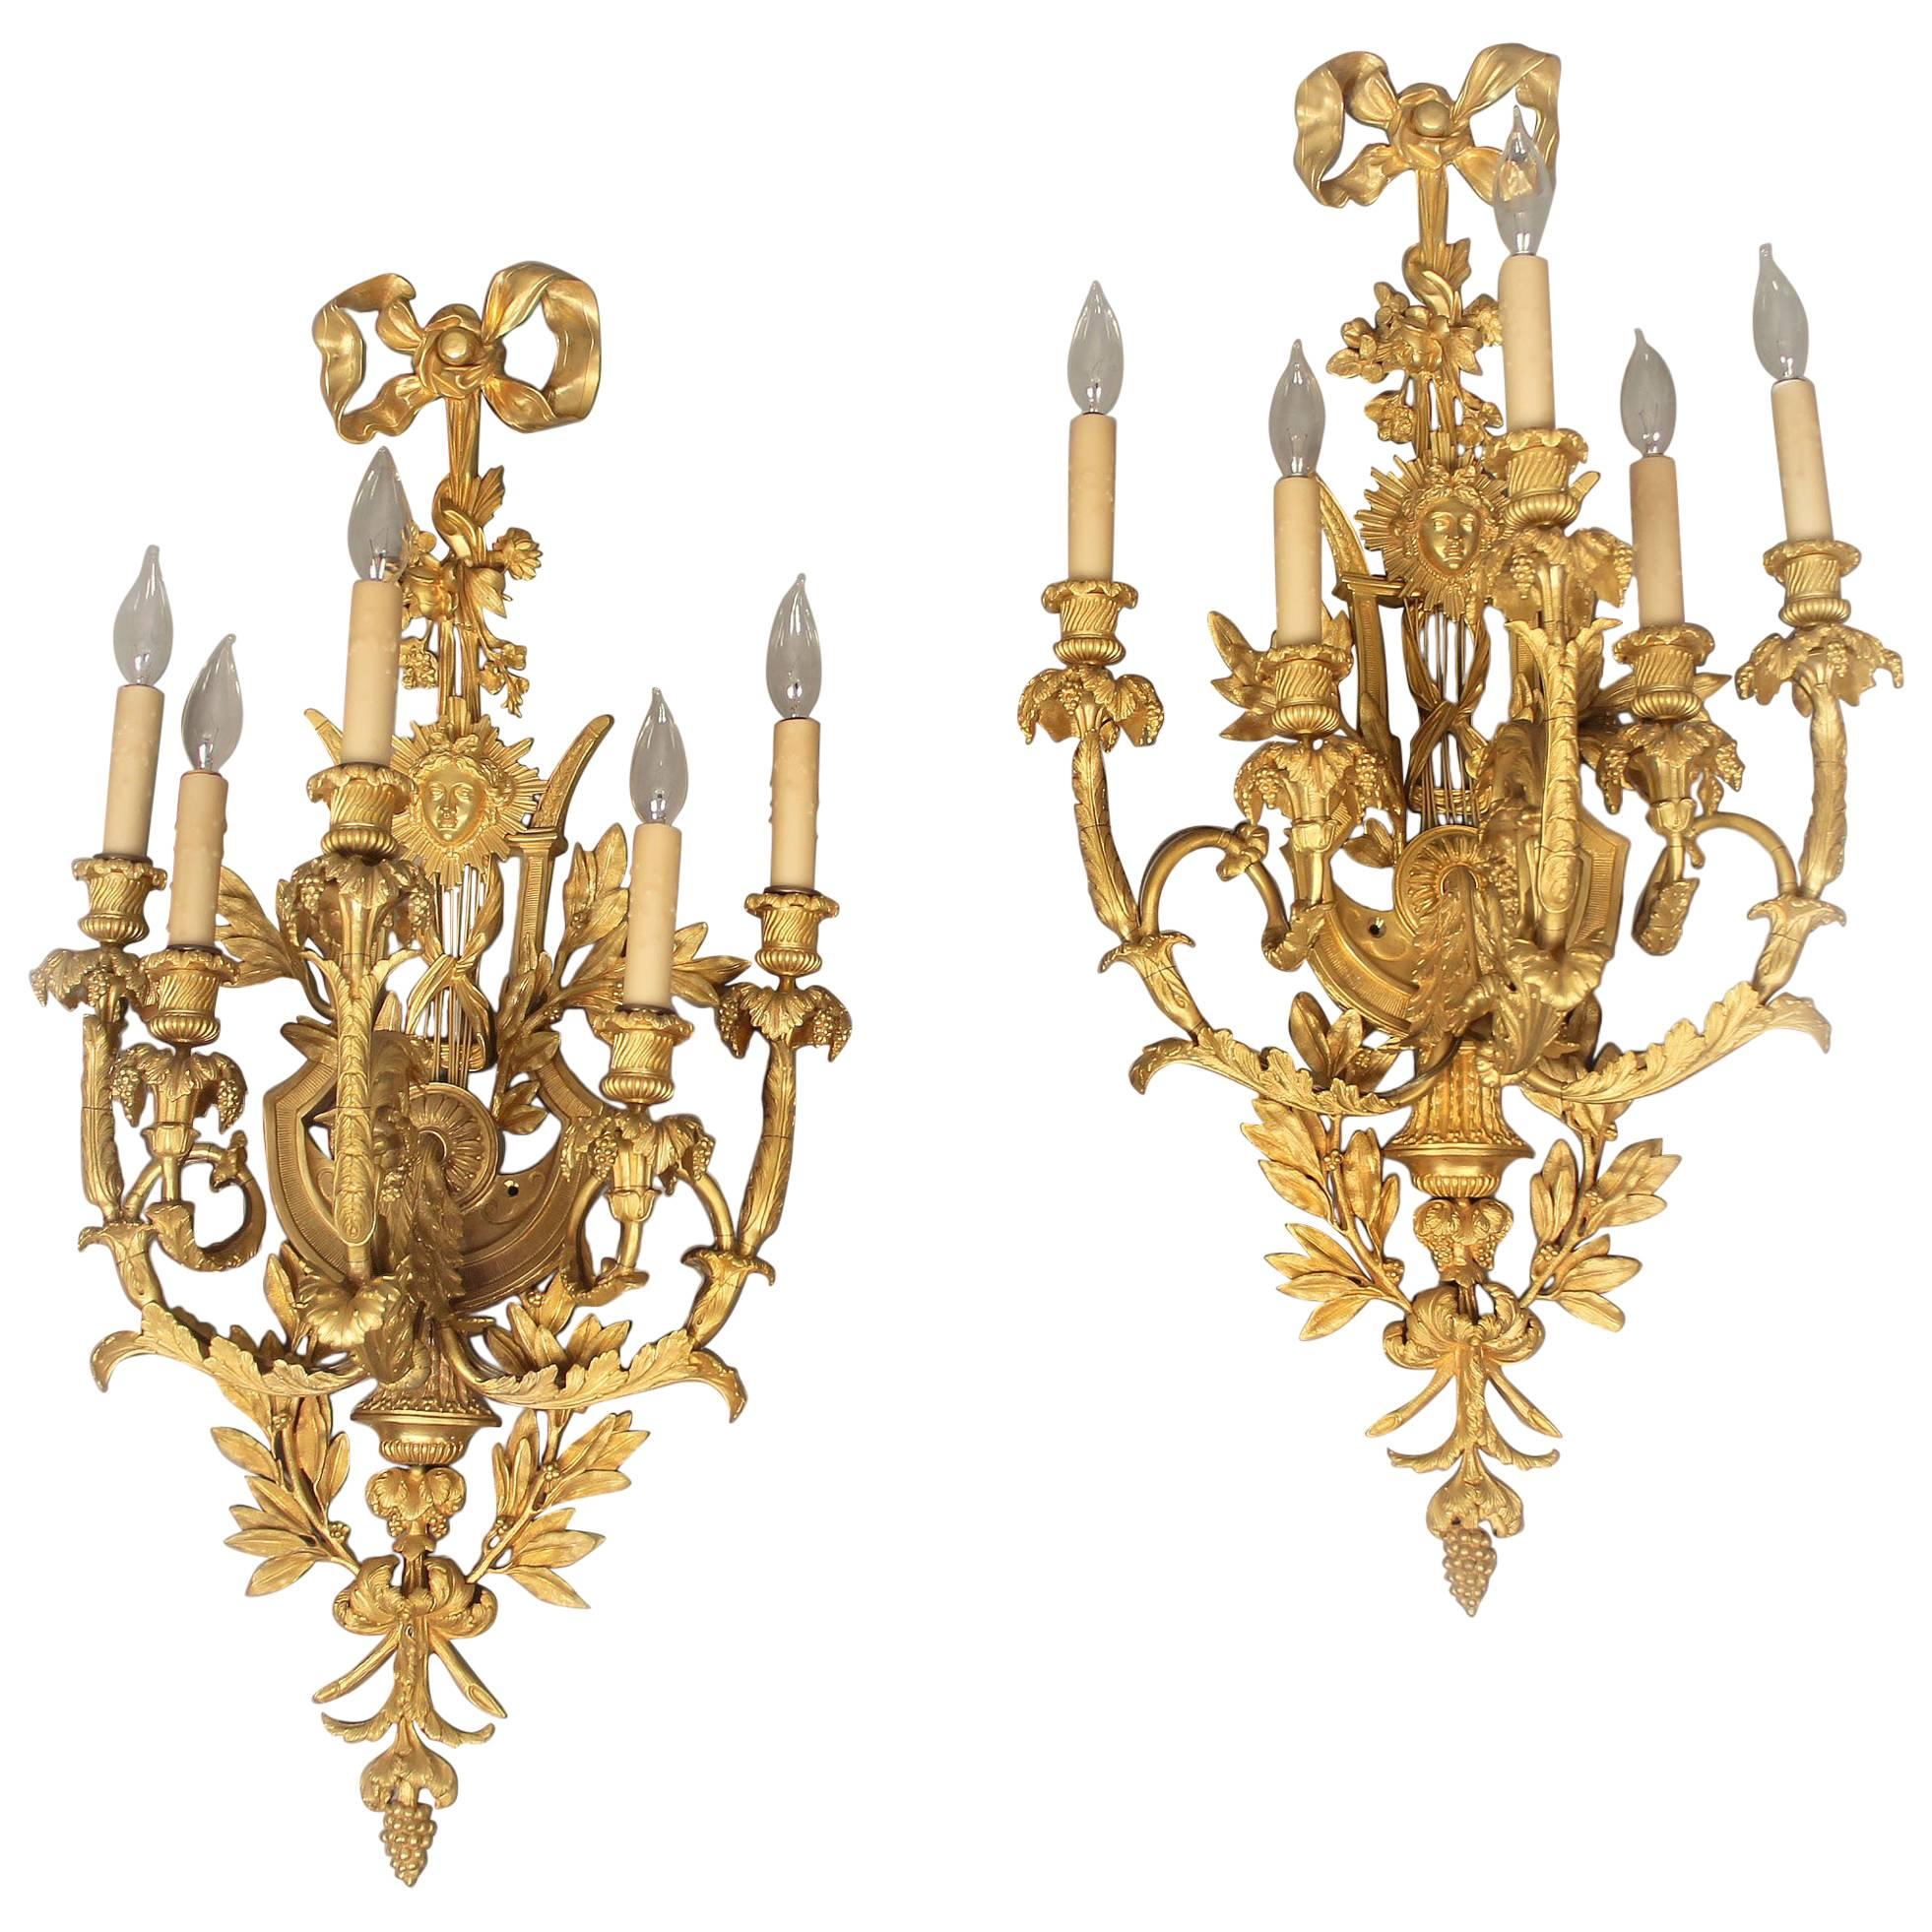 Large and Elaborate Pair of Early 20th Century Gilt Bronze Five-Light Sconces